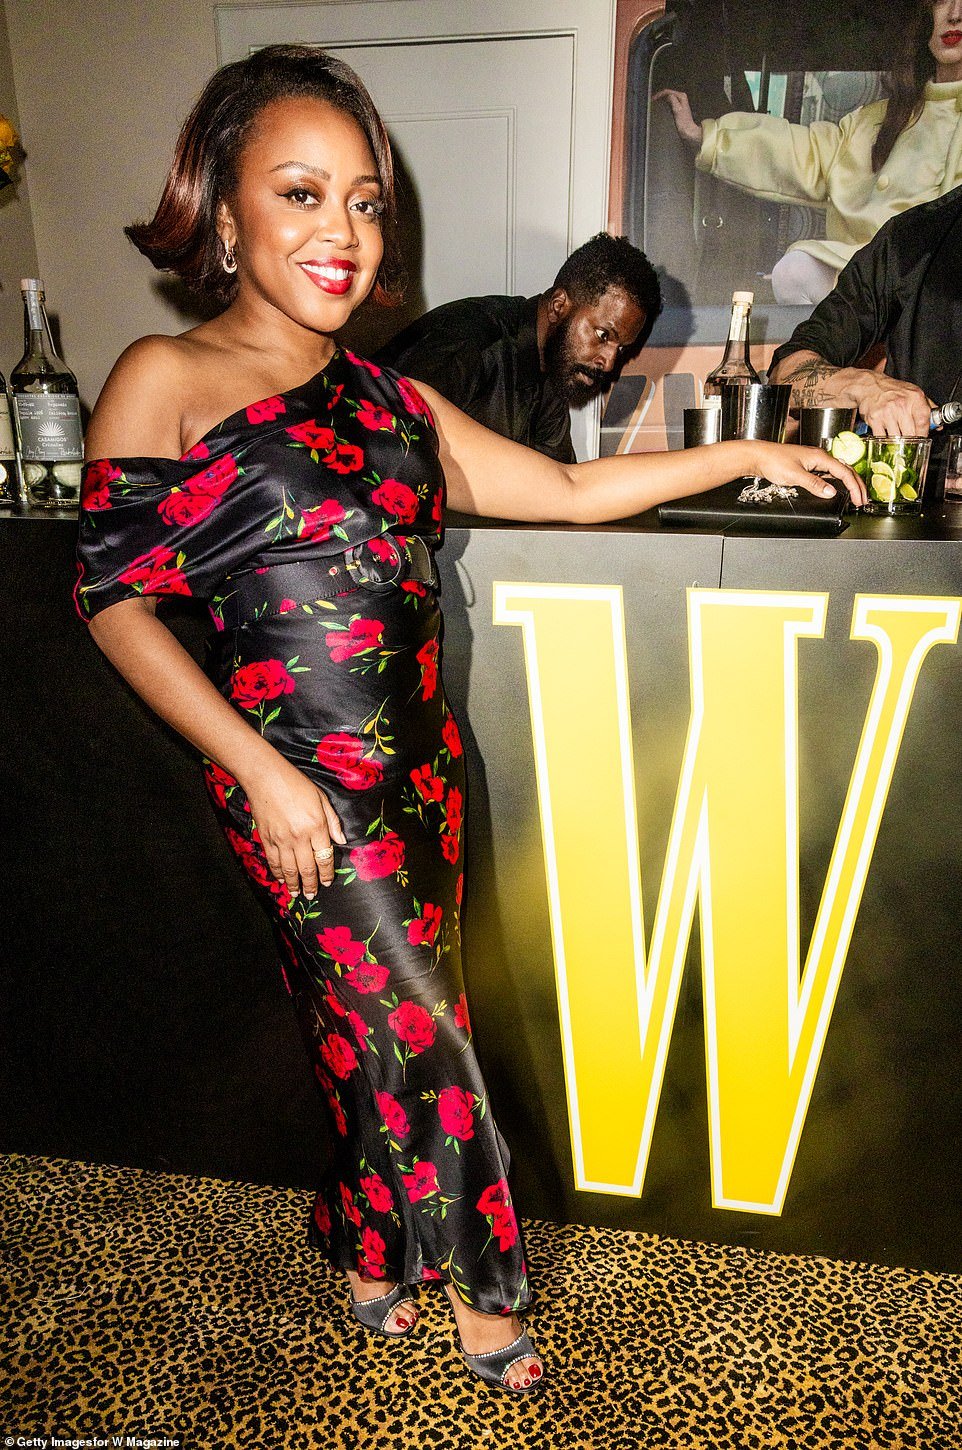 Abbott Elementary star, Quinta Brunson, was elegantly showcased in a black, figure-hugging dress with red floral detailing throughout the fabric